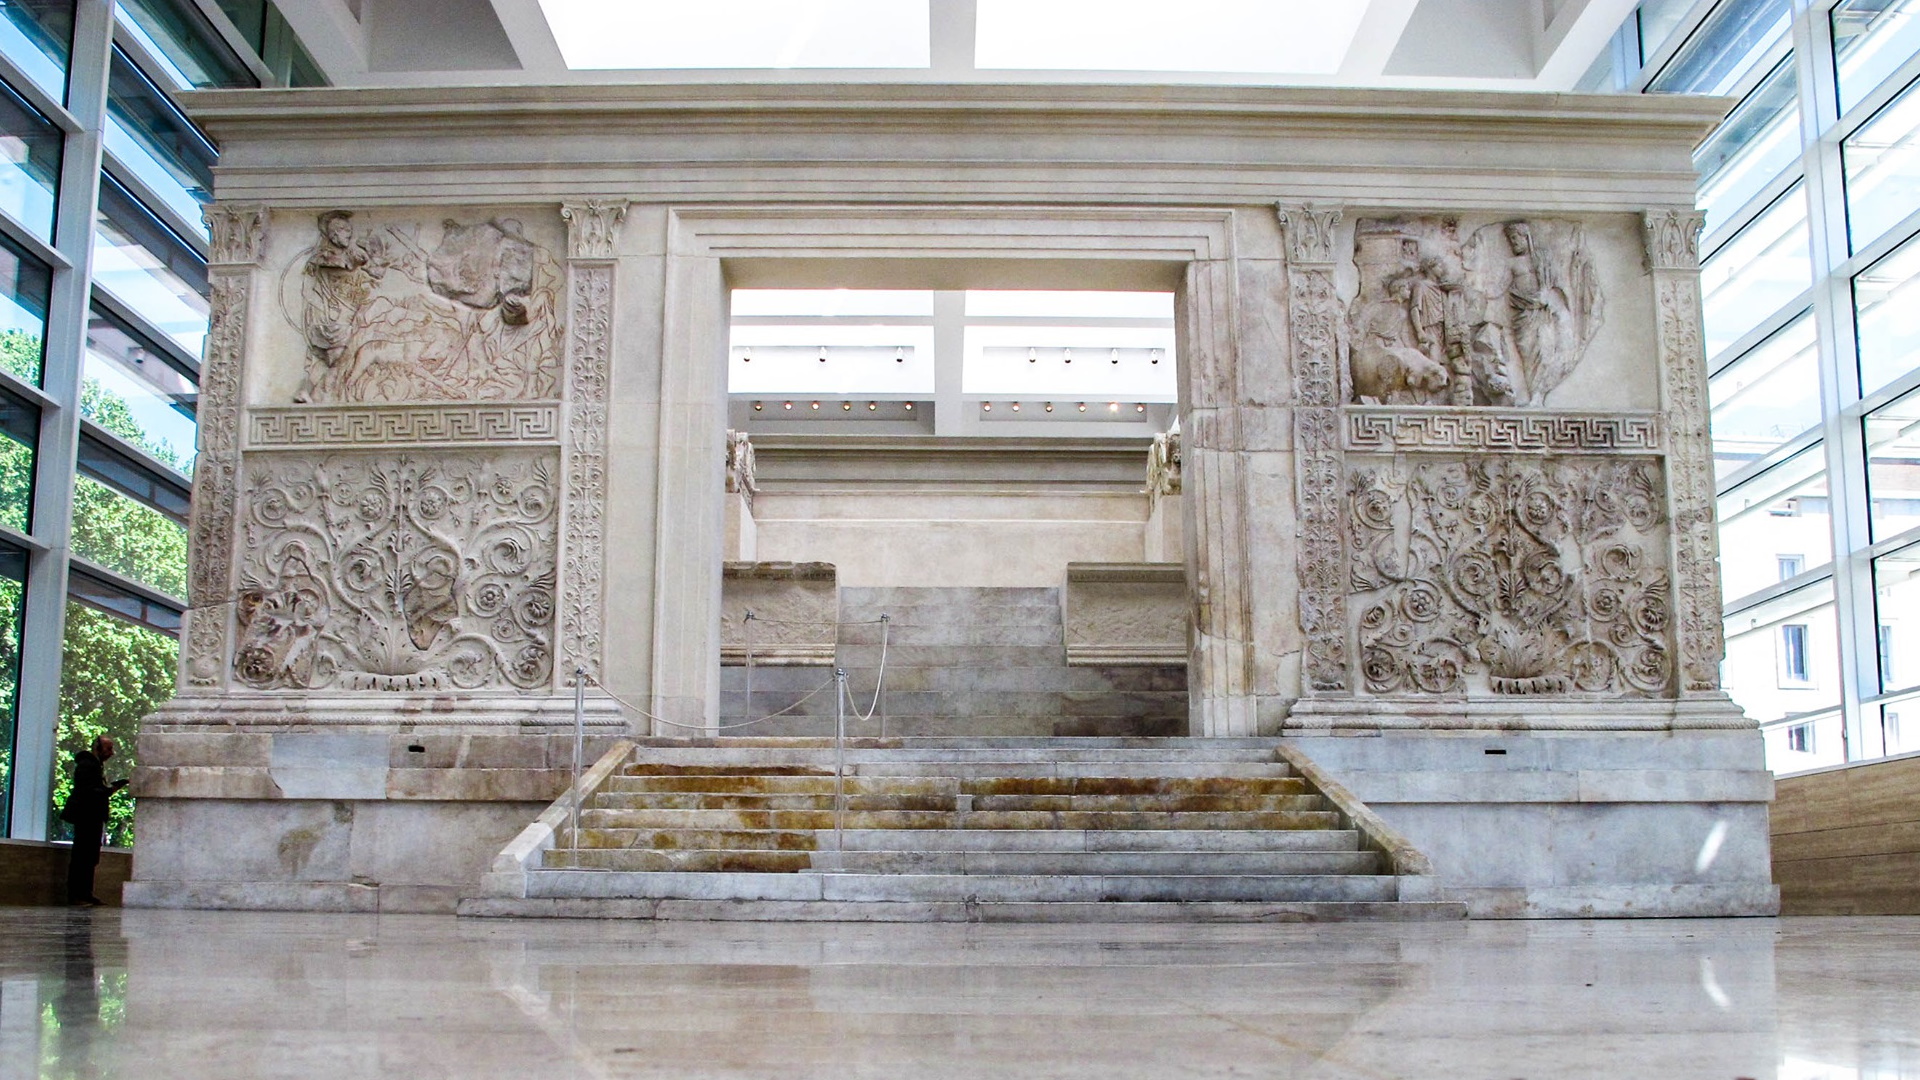 Museo dell'Ara Pacis - Ara Pacis Augustae